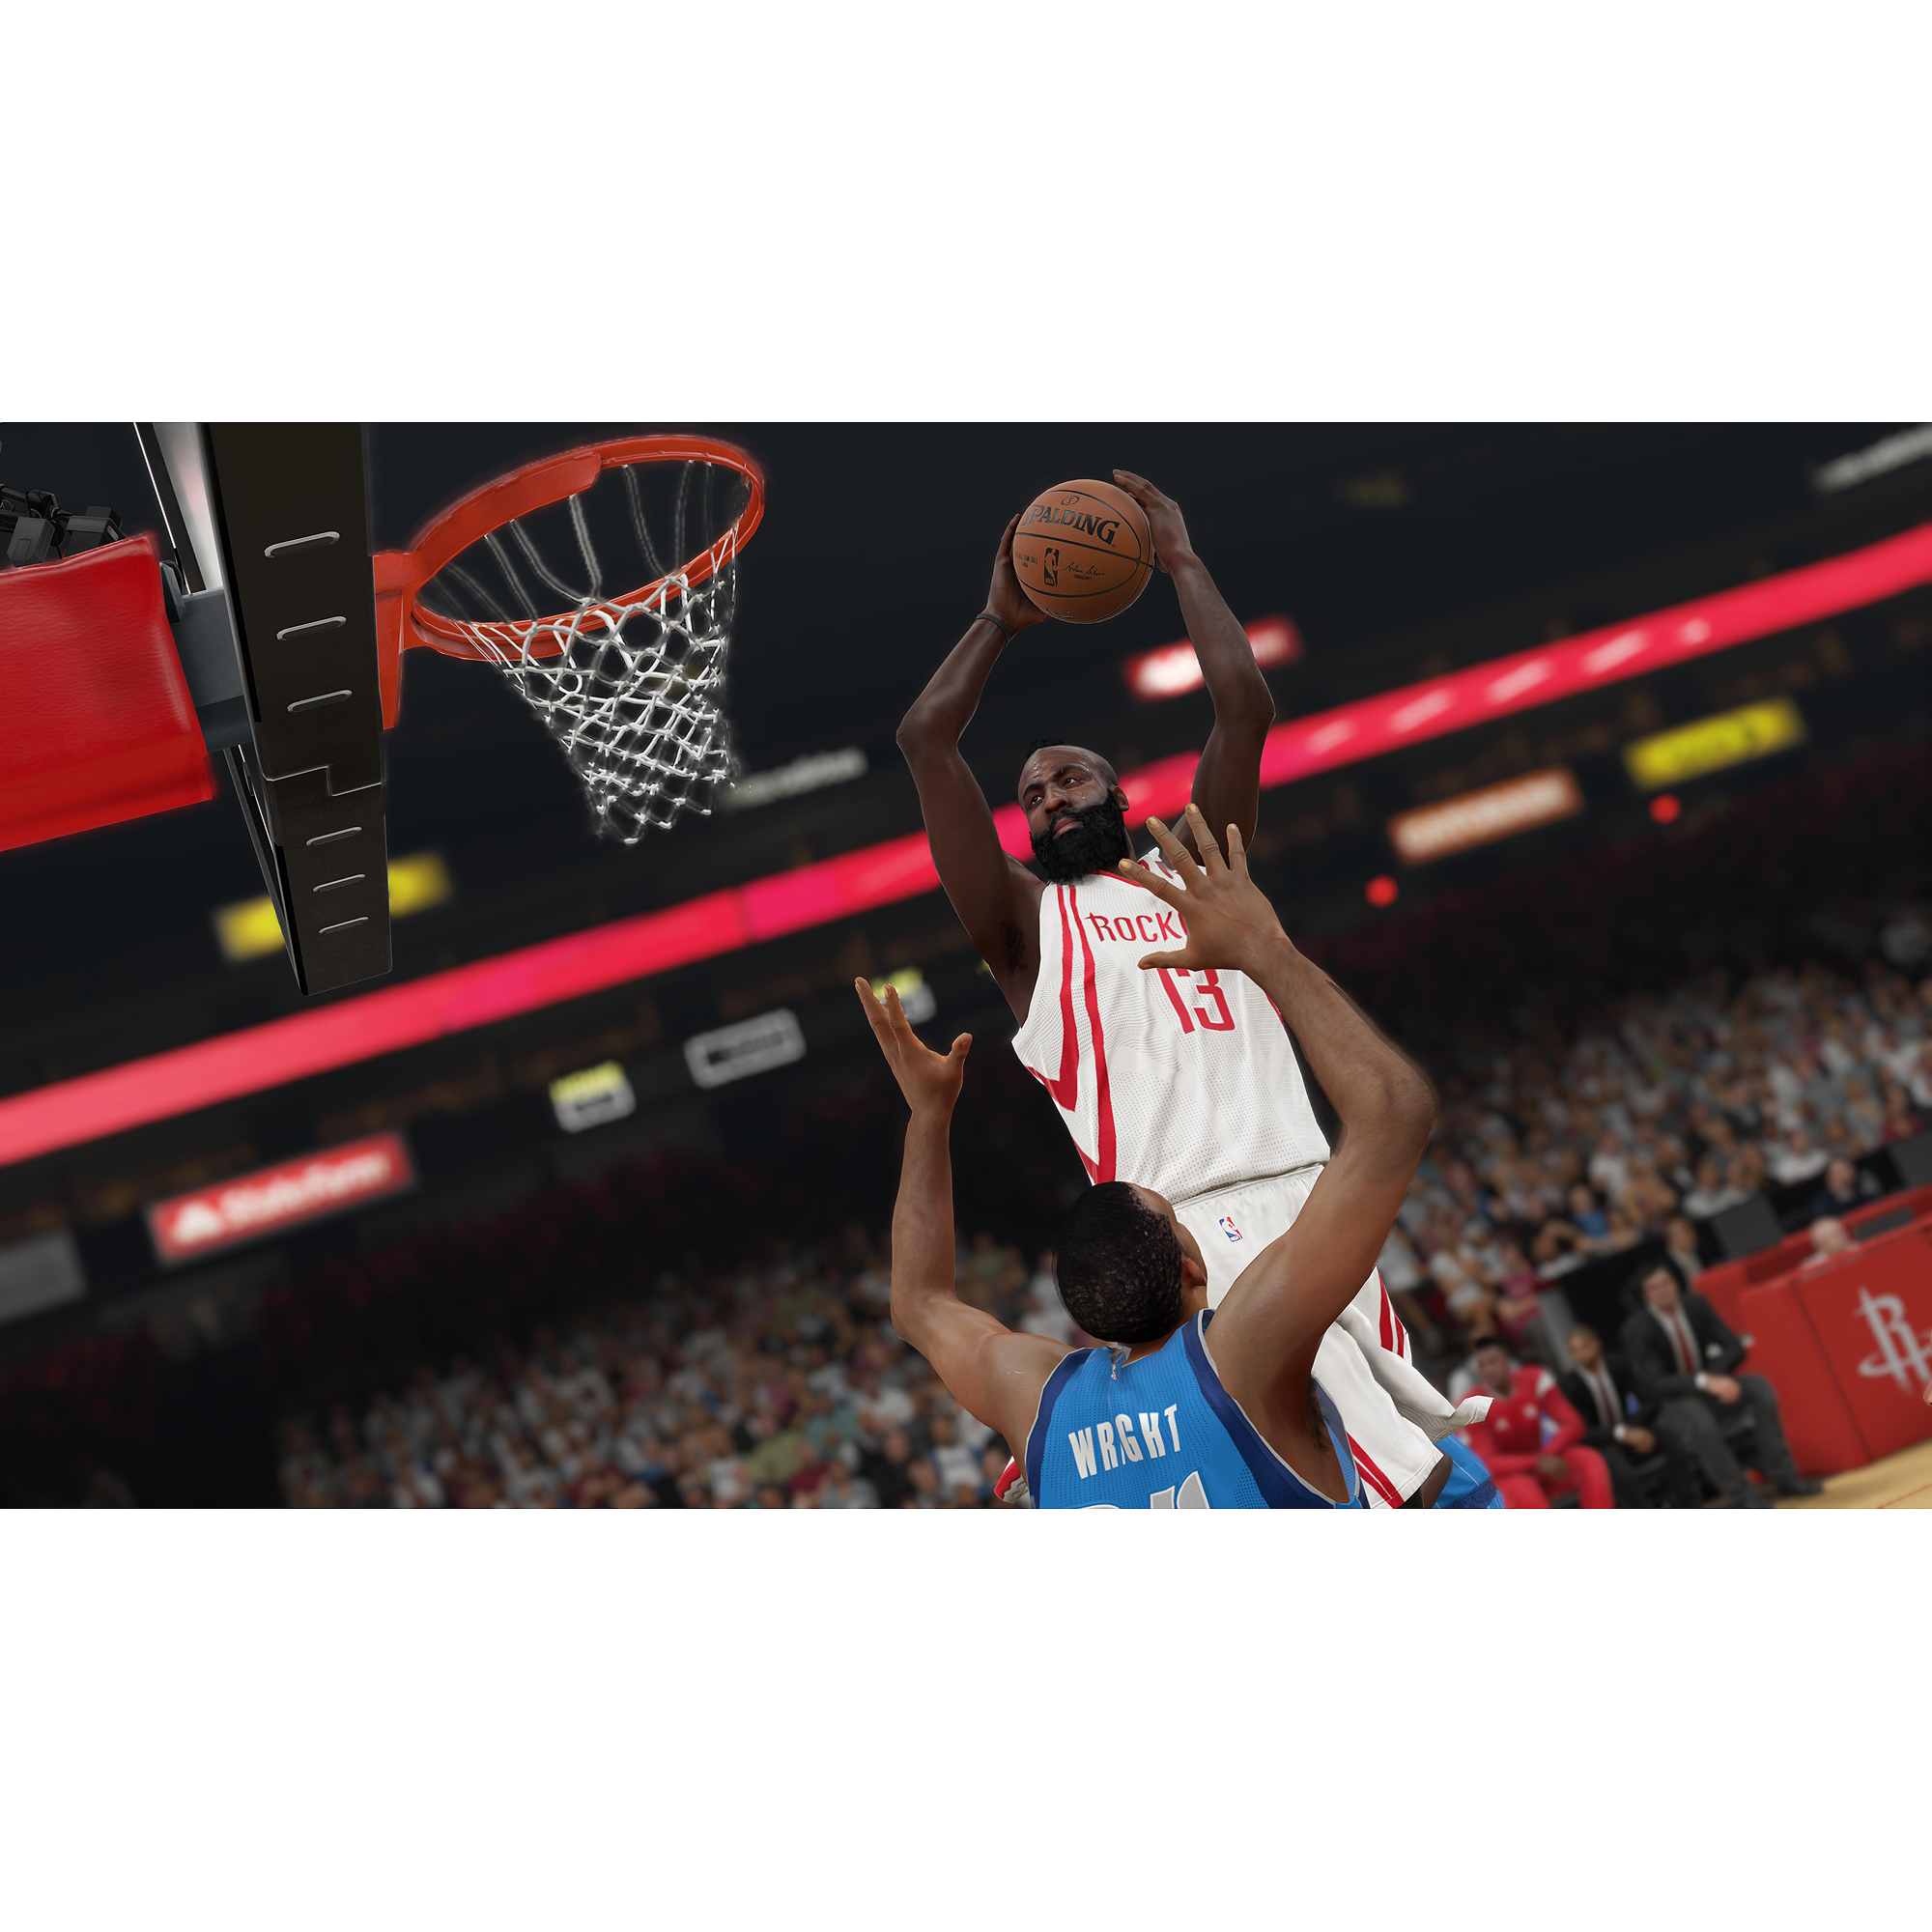 NBA 2K15 for Xbox One - image 5 of 7